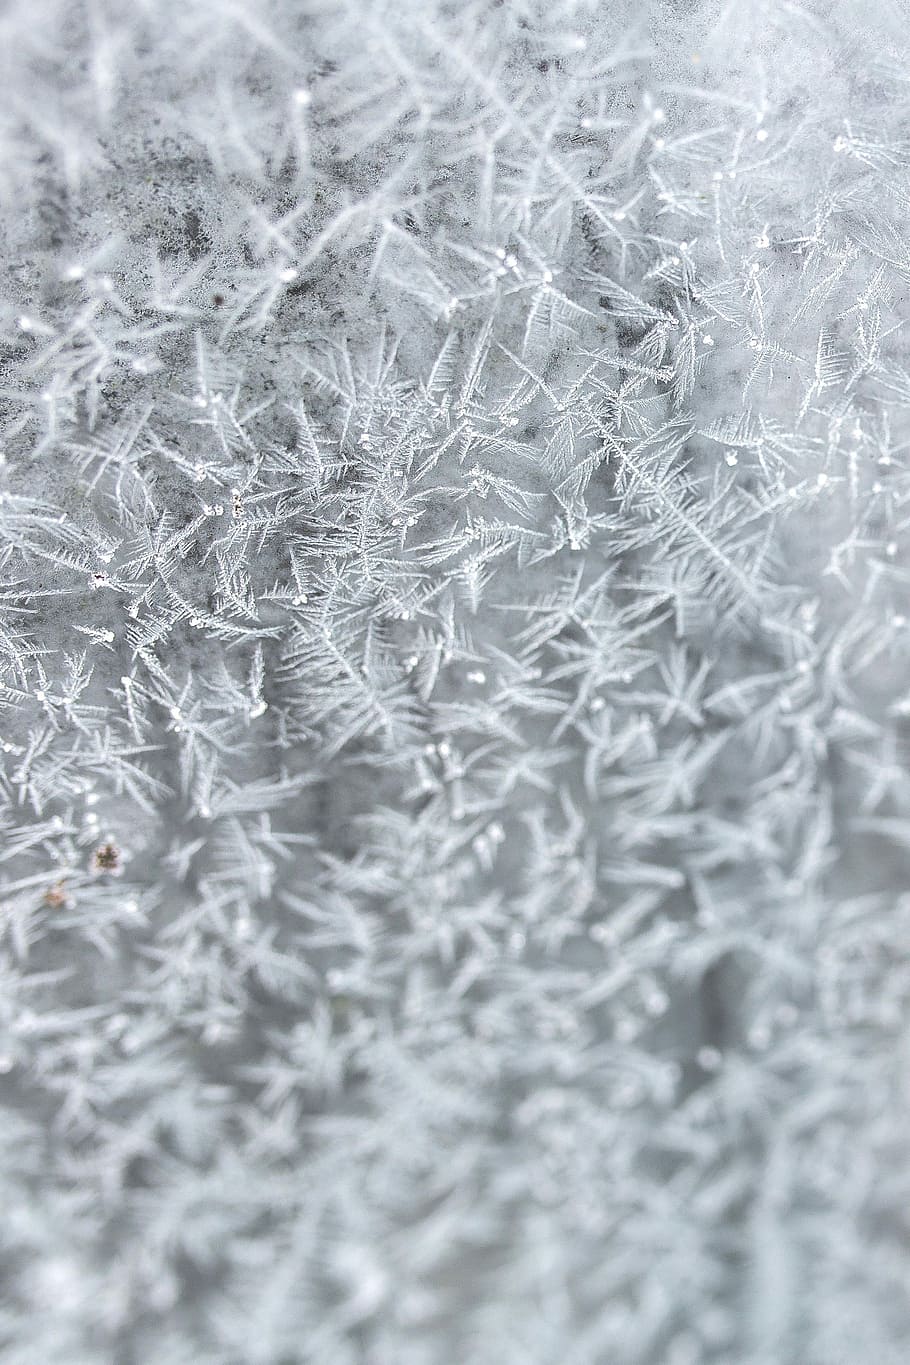 frosty background, Frosty, background, frost, winter, cold, ice, backgrounds, pattern, close-up